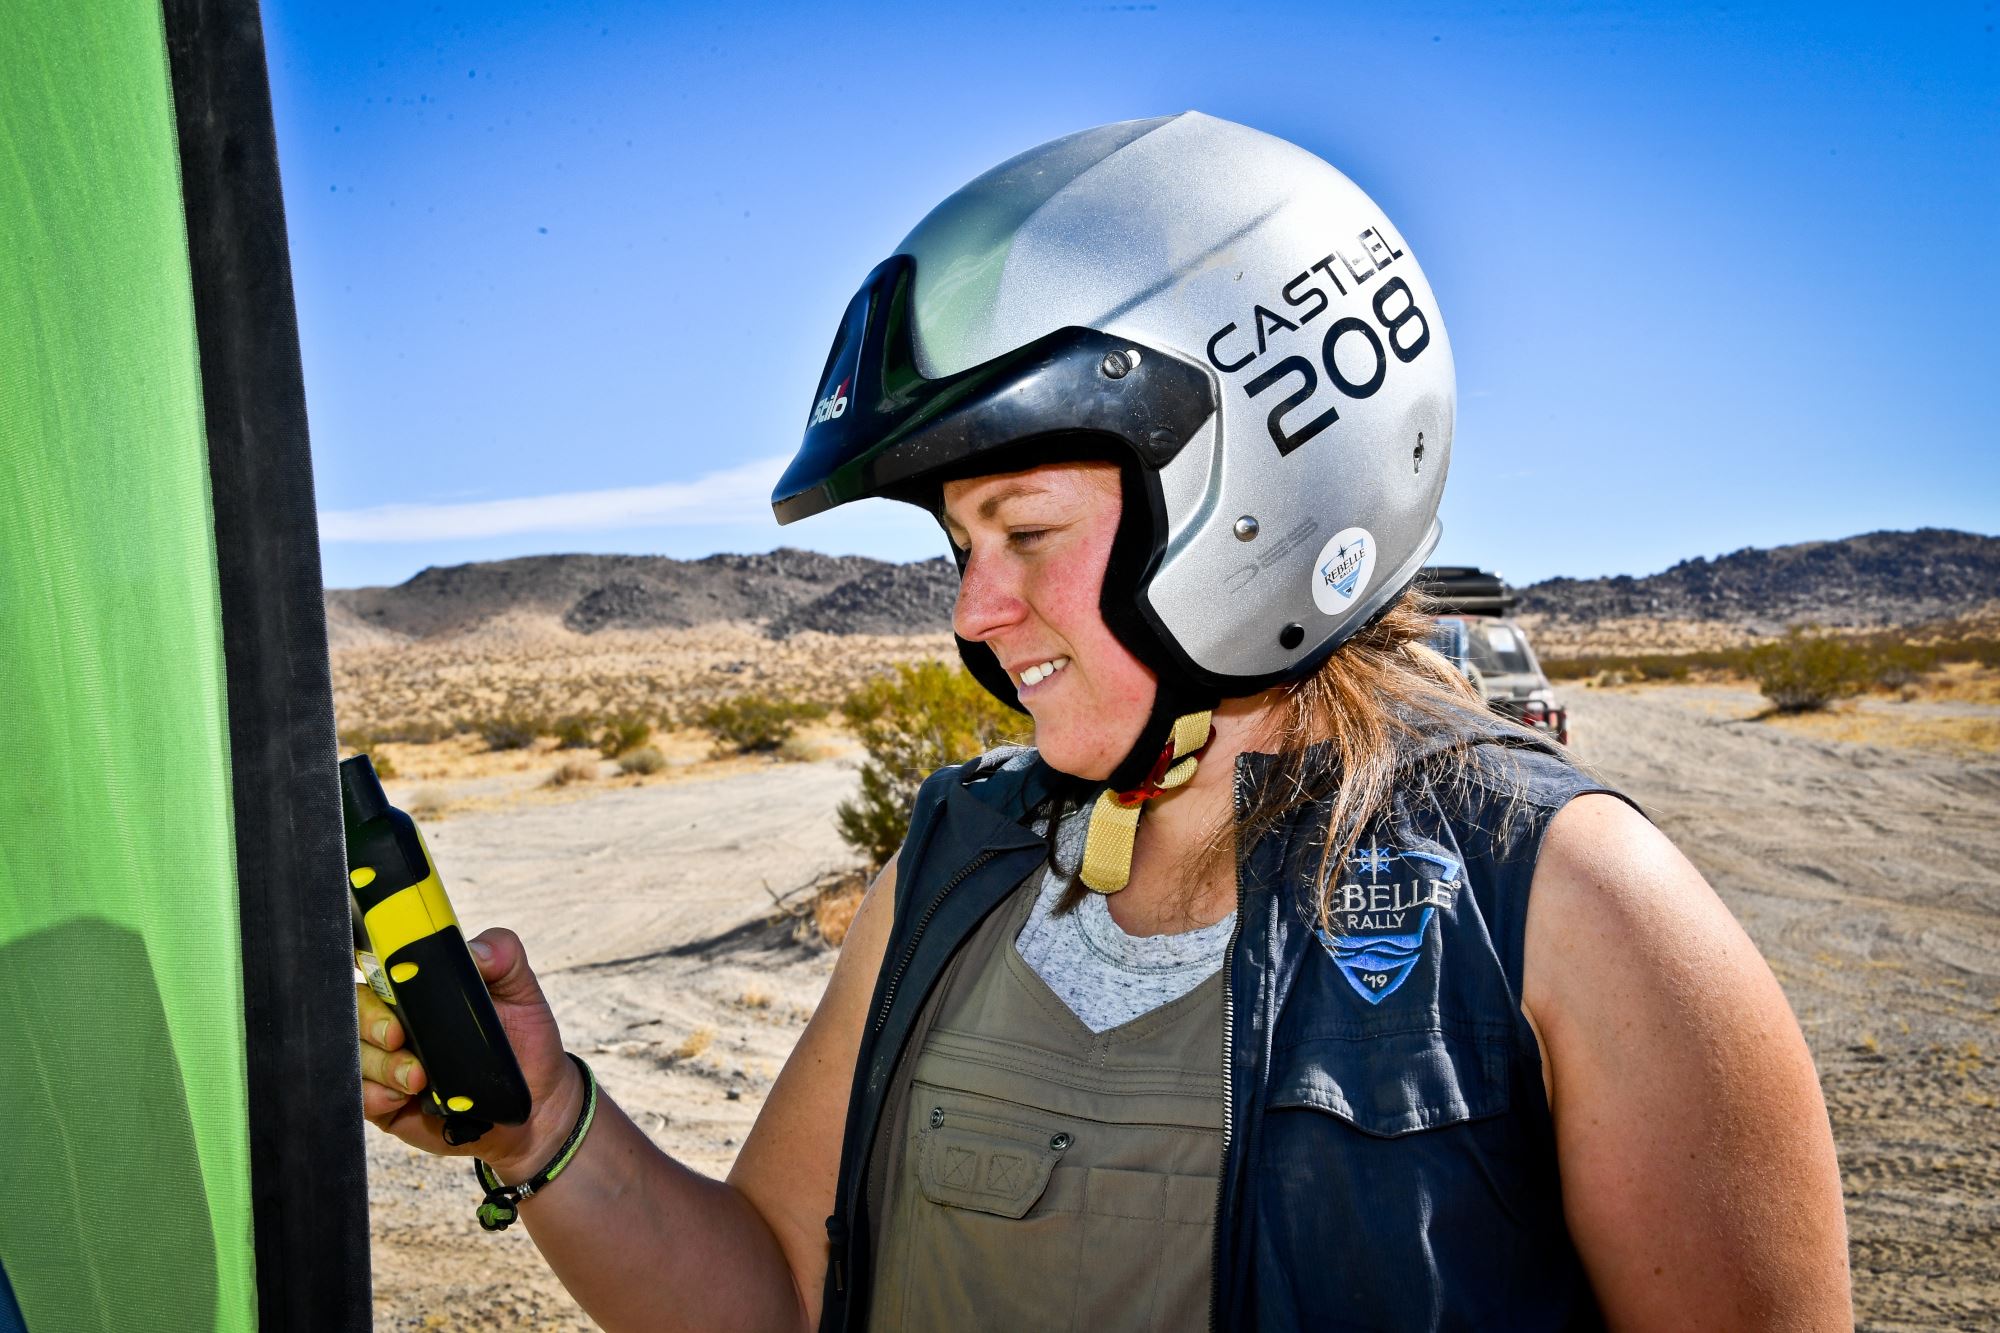 woman in a helmet using a tool in the desert in front of SUV